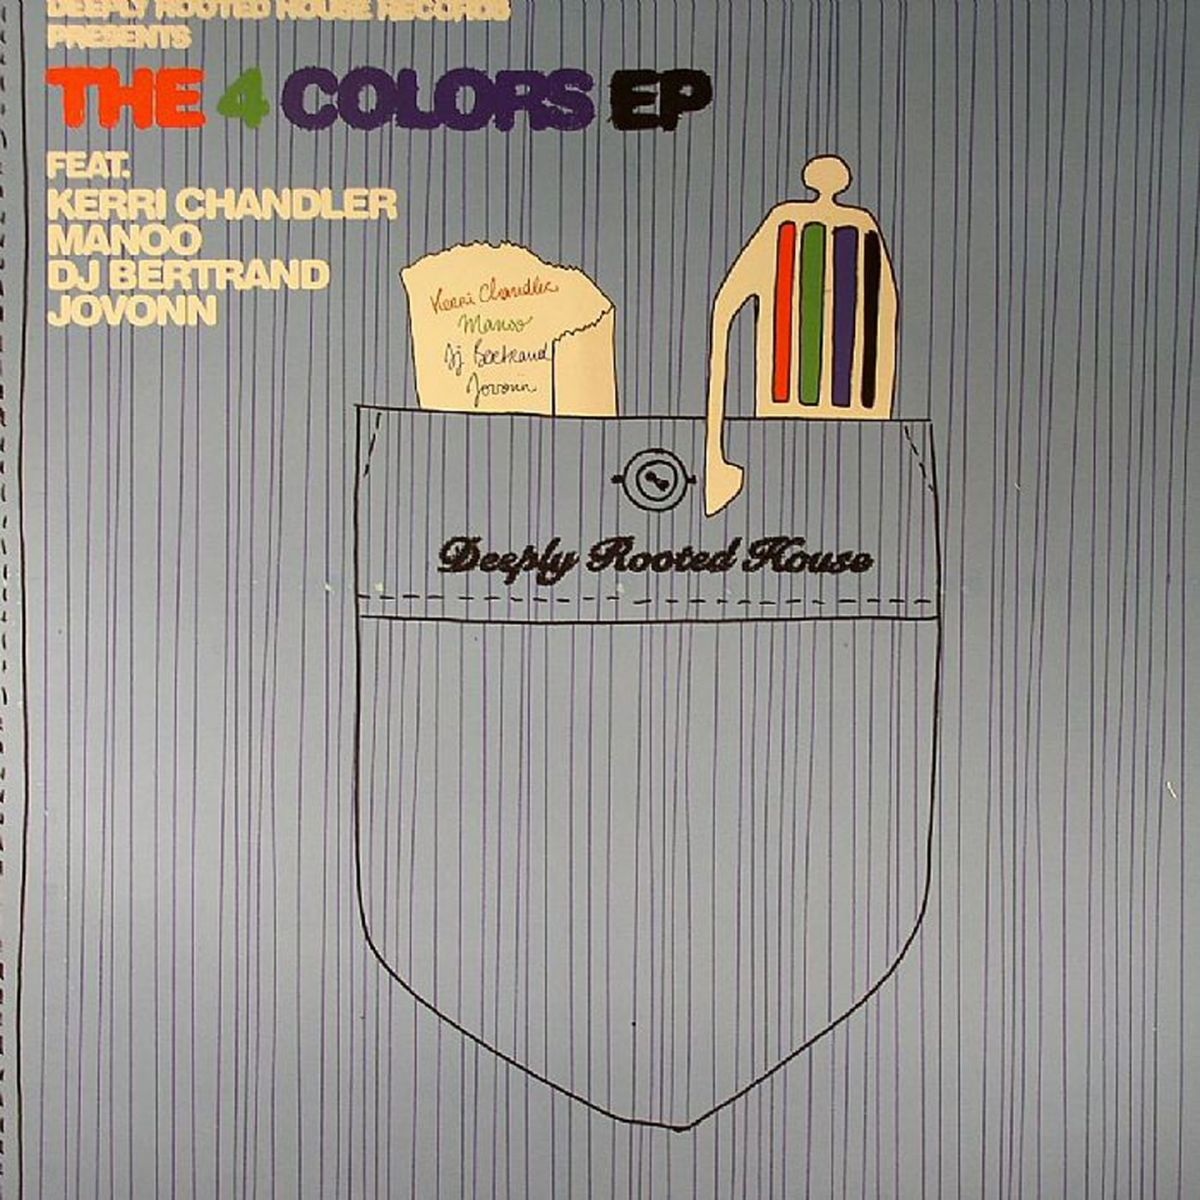 VA - The 4 Colors Ep / Deeply Rooted House